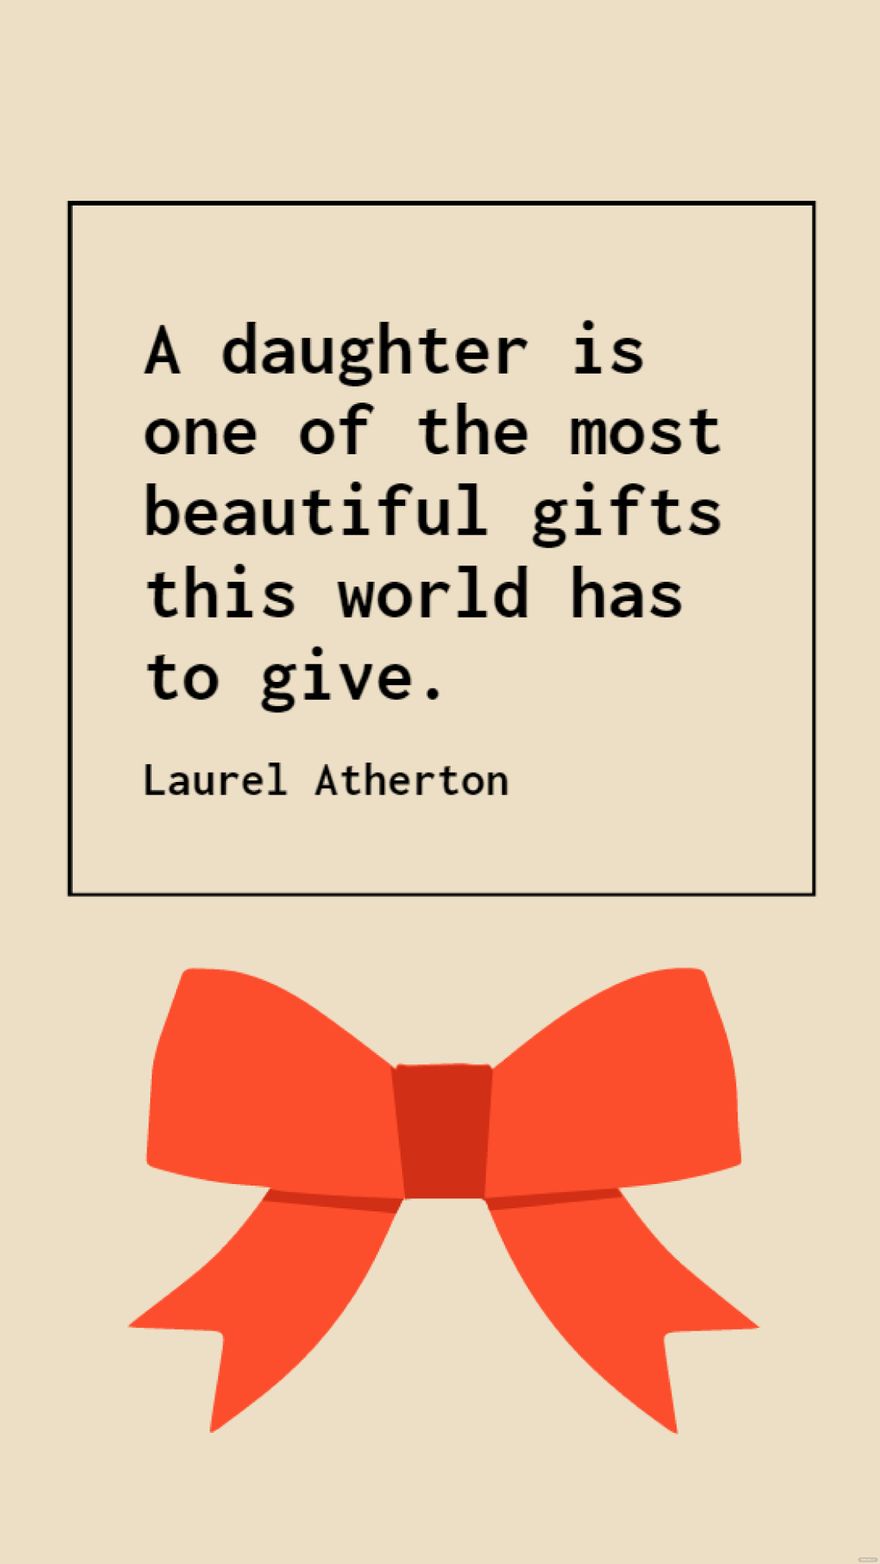 Laurel Atherton - A daughter is one of the most beautiful gifts this world has to give.